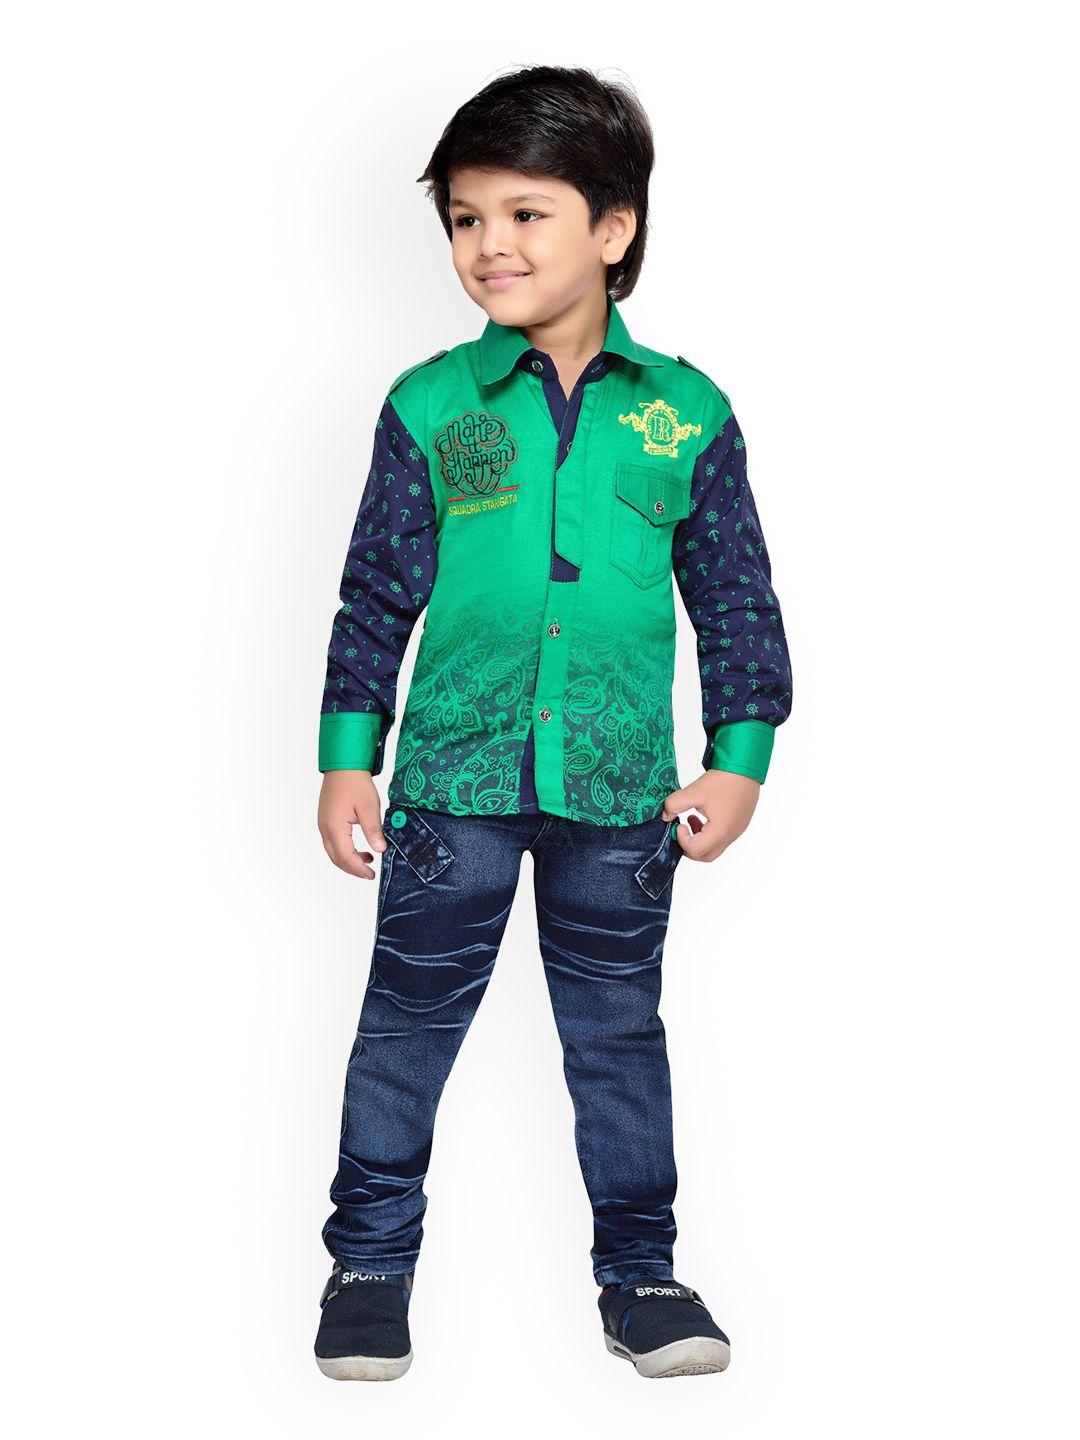 kidling-boys-green-&-blue-printed-shirt-with-jeans